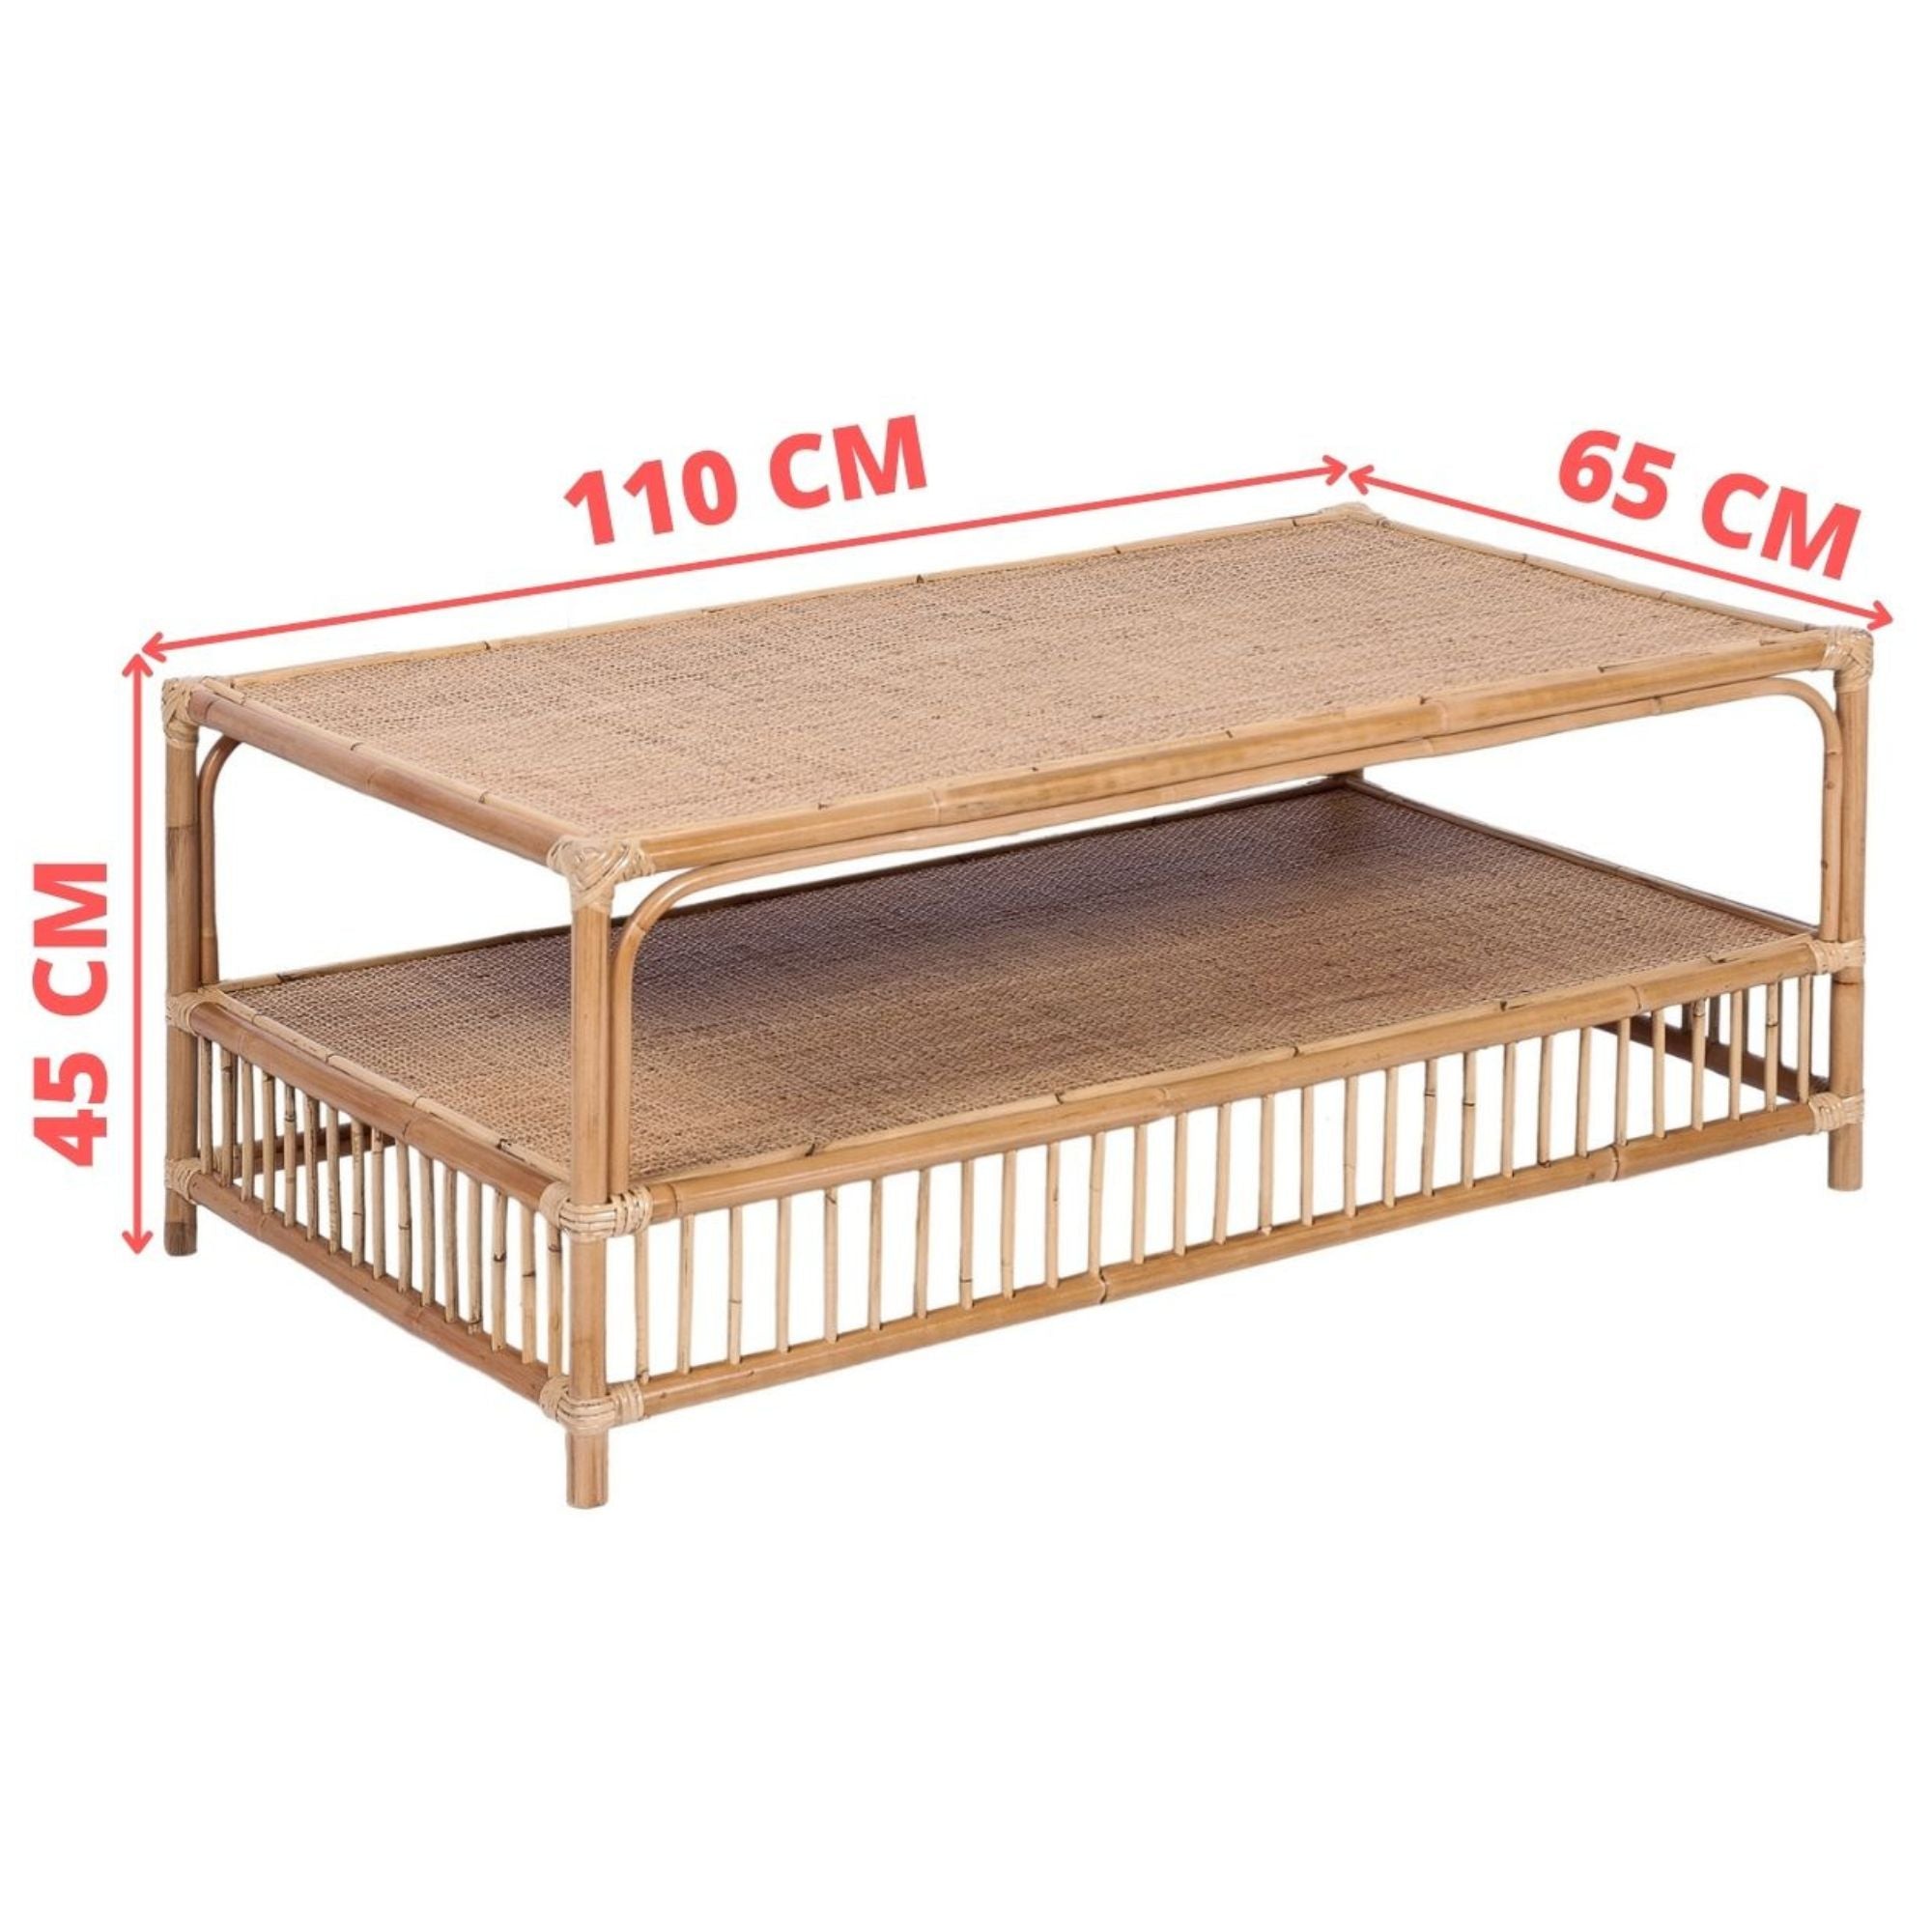 110Cm Rattan Cane Coffee Table - Natural